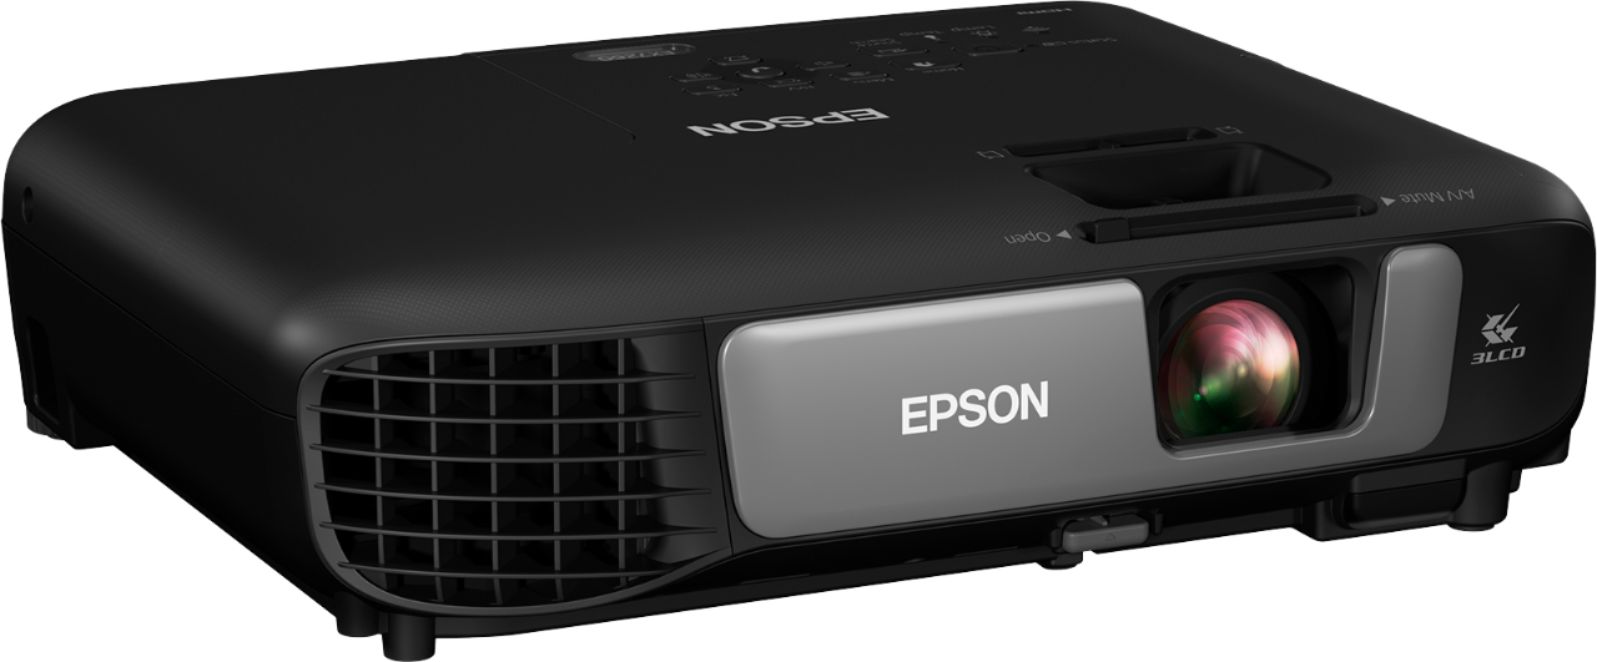 Angle View: Epson - Pro EX7260 720p 3LCD Projector - Black